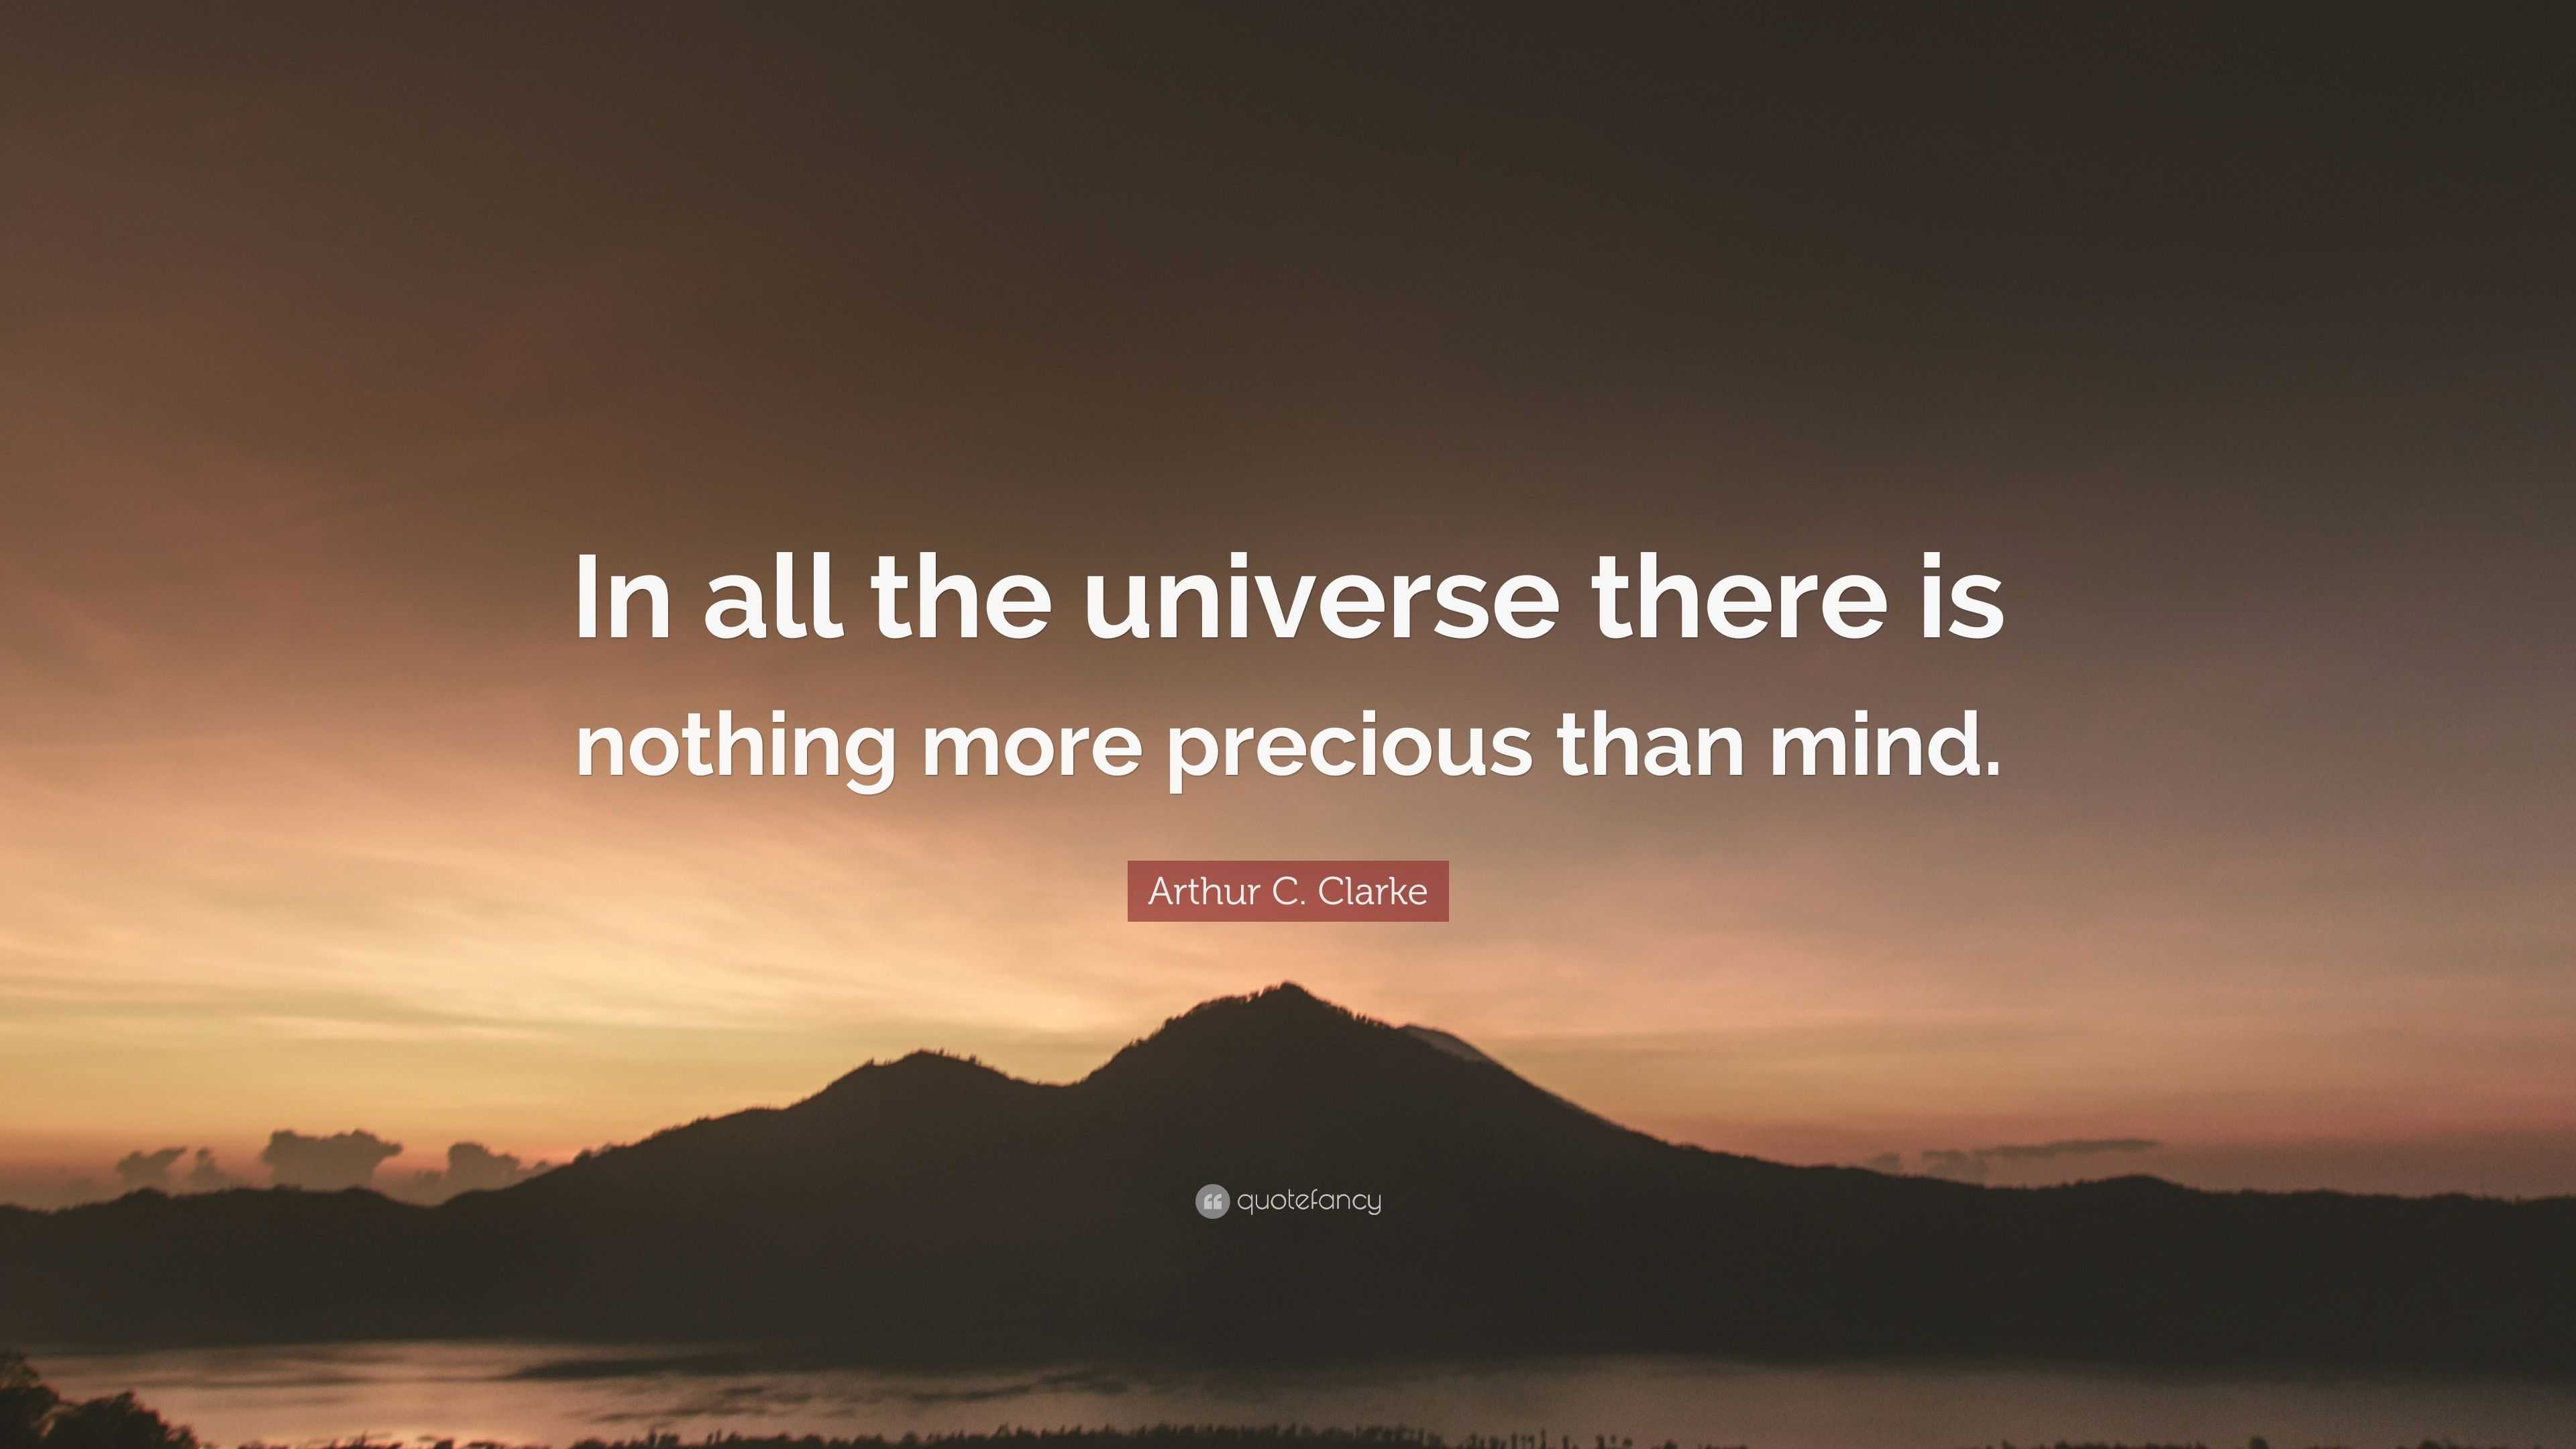 Arthur C. Clarke Quote: “In all the universe there is nothing more ...